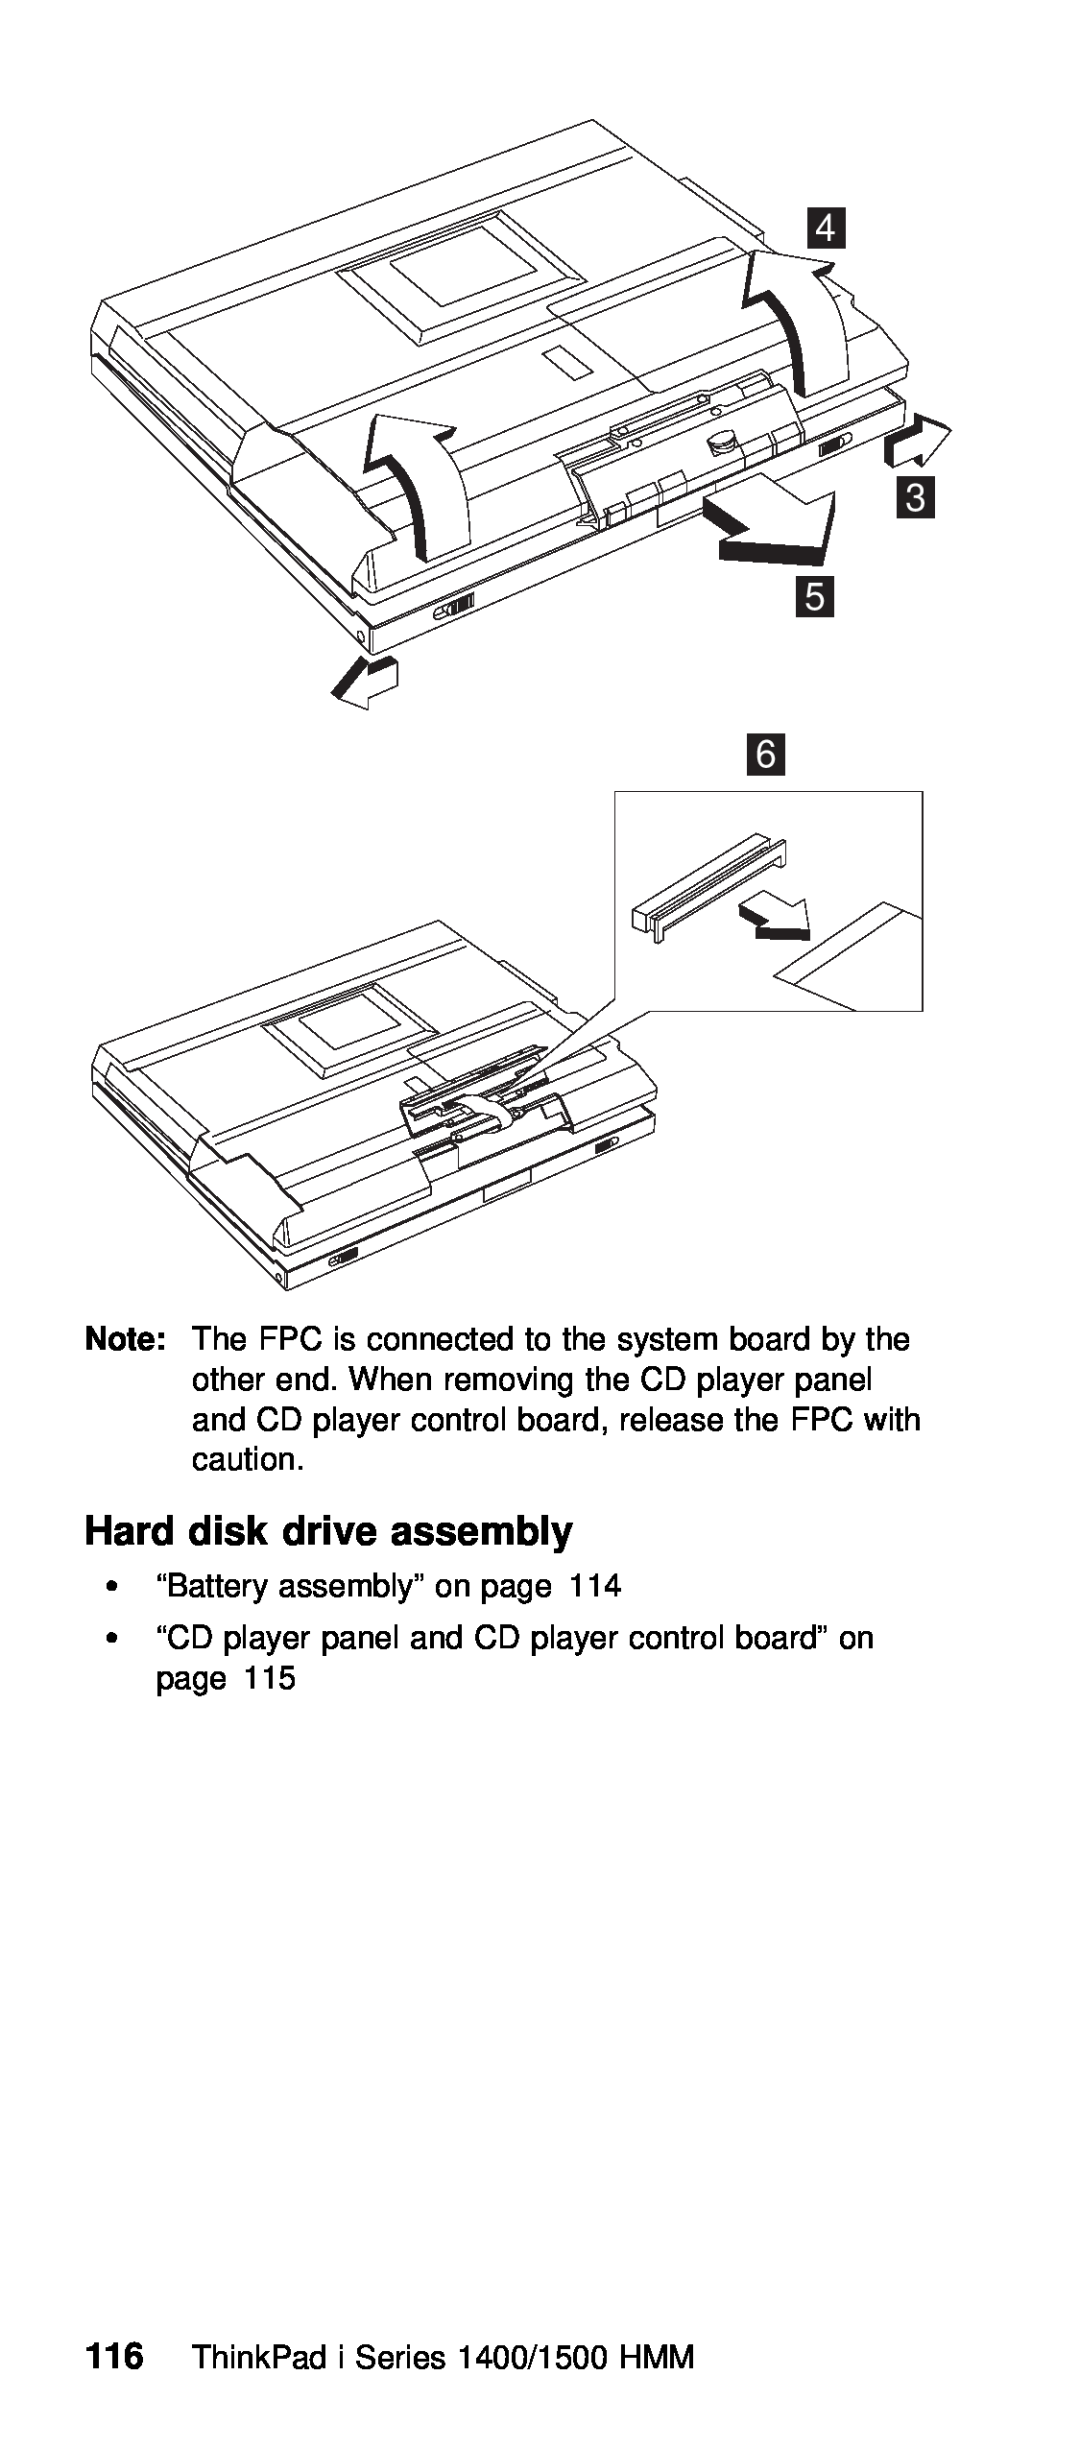 IBM Series 1500 manual Hard disk drive assembly, Ÿ “Battery assembly” on page, ThinkPad i Series 1400/1500 HMM 